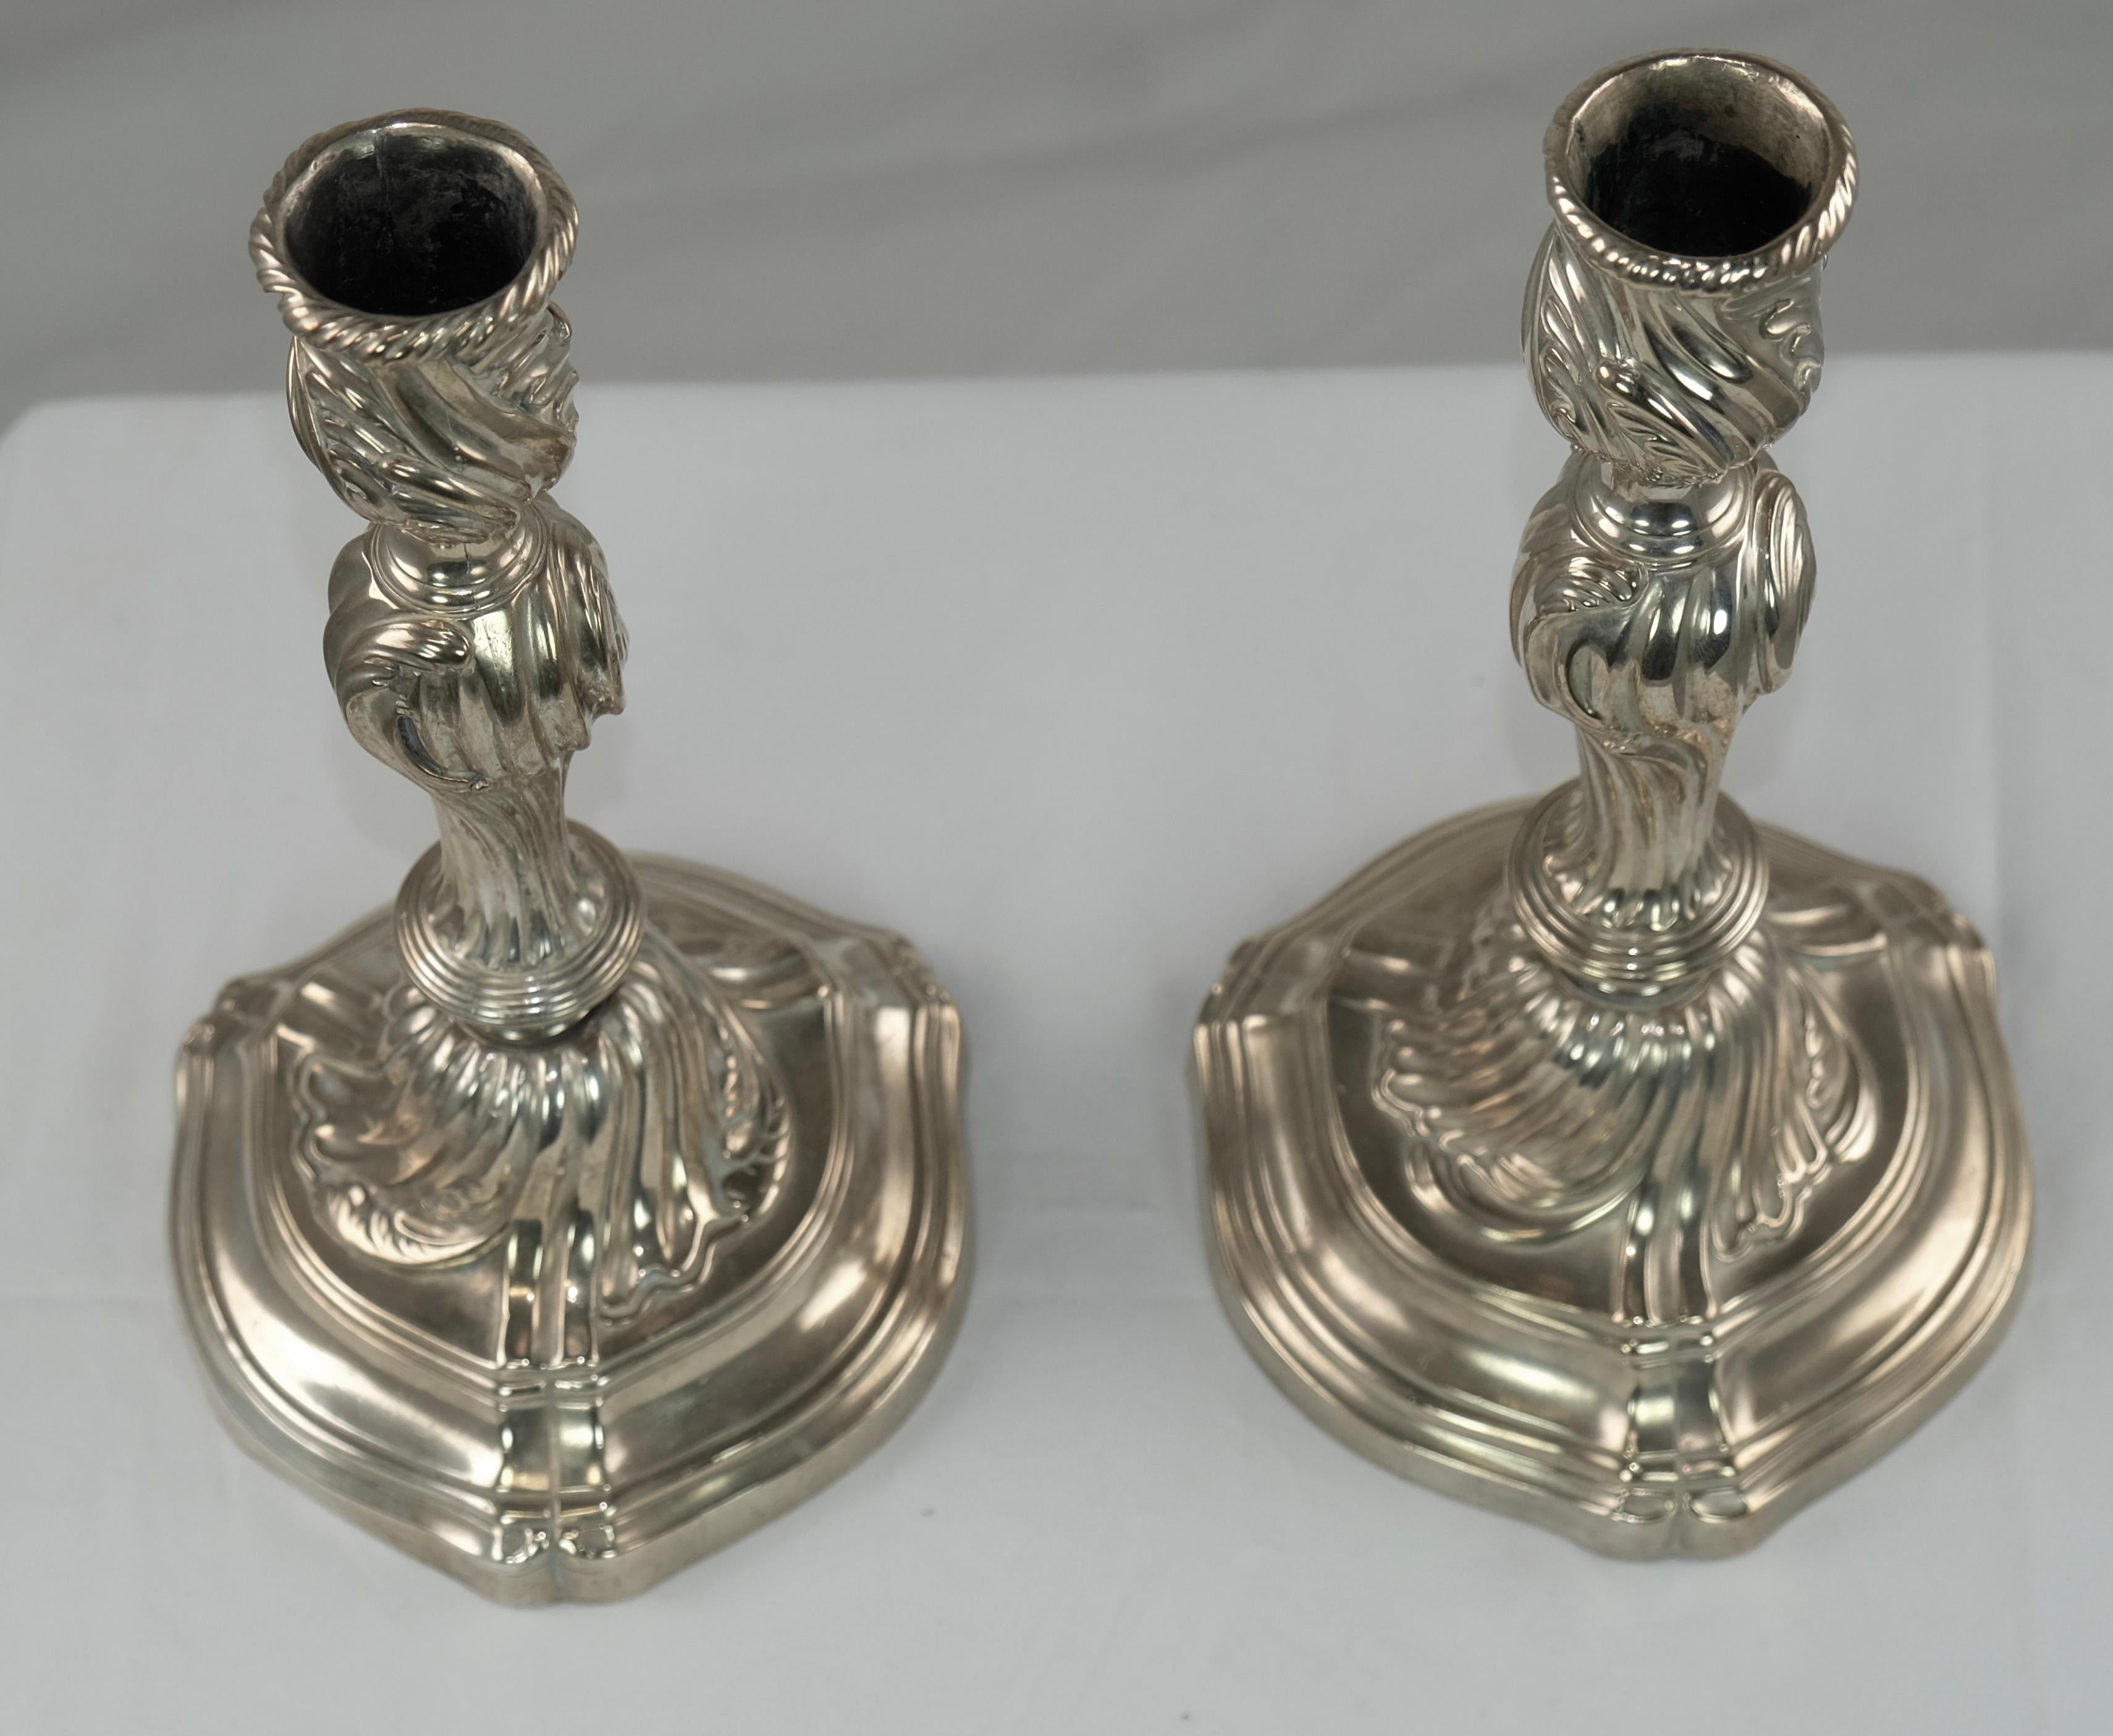 Cast Pair of silvered bronce Rococo Candlesticks, 18th Century